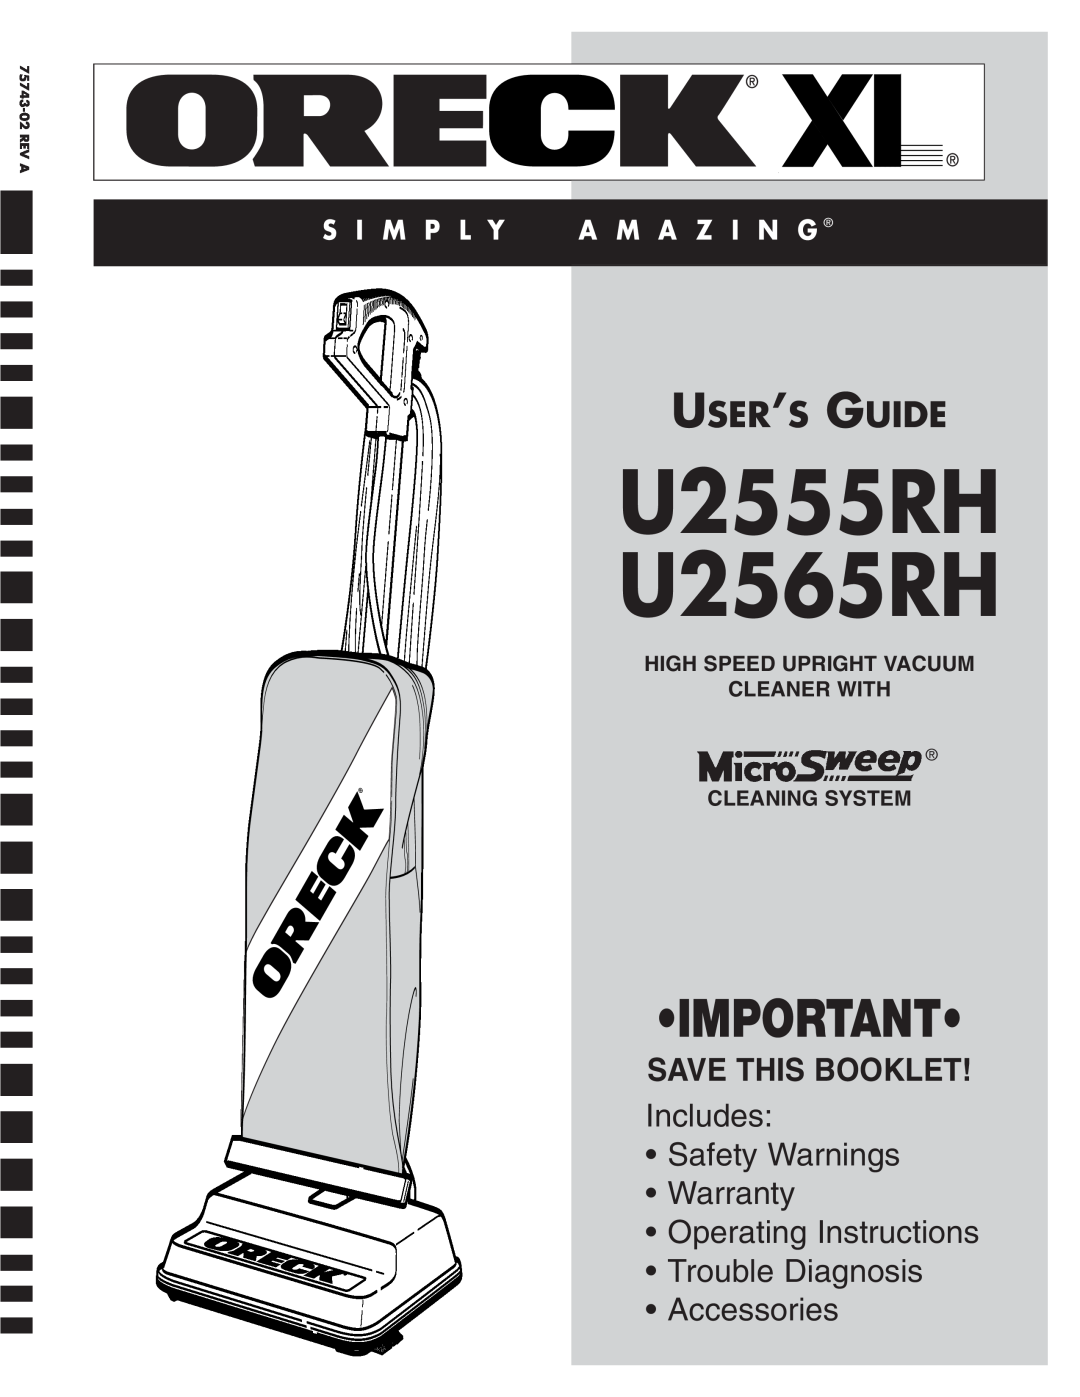 Oreck warranty Save This Booklet, High Speed Upright Vacuum Cleaner With, Cleaning System, U2555RH U2565RH, Accessories 